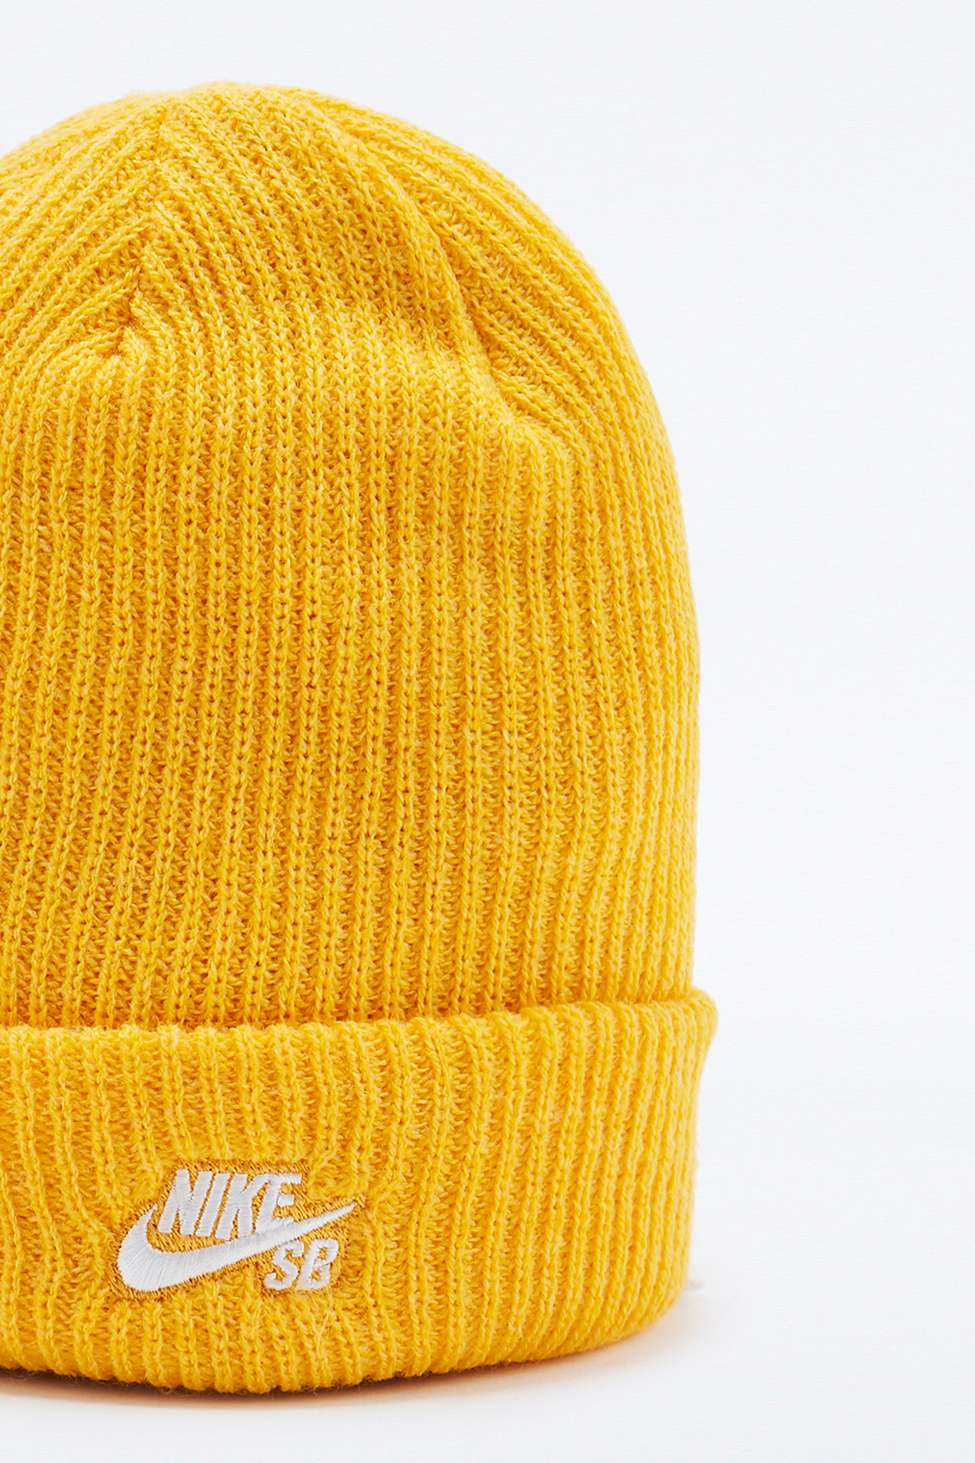 yellow nike beanie factory f57d8 a97be